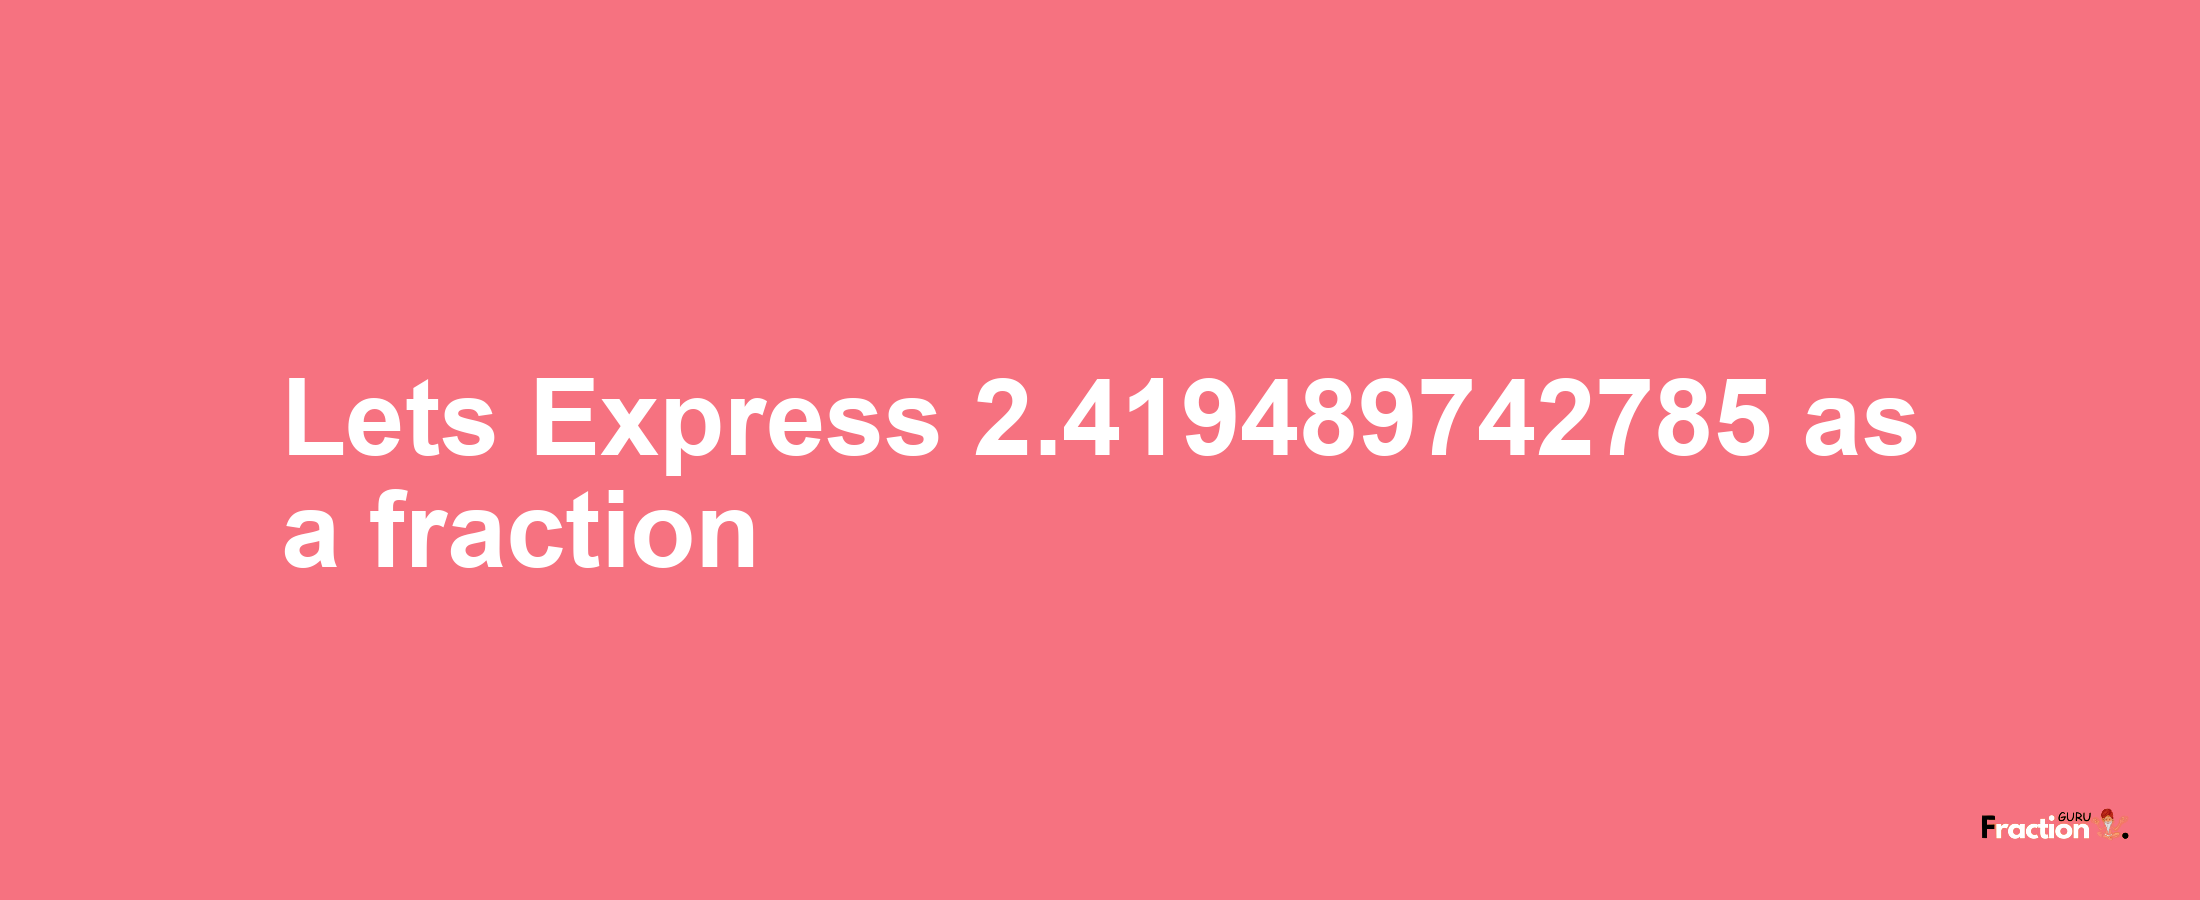 Lets Express 2.419489742785 as afraction